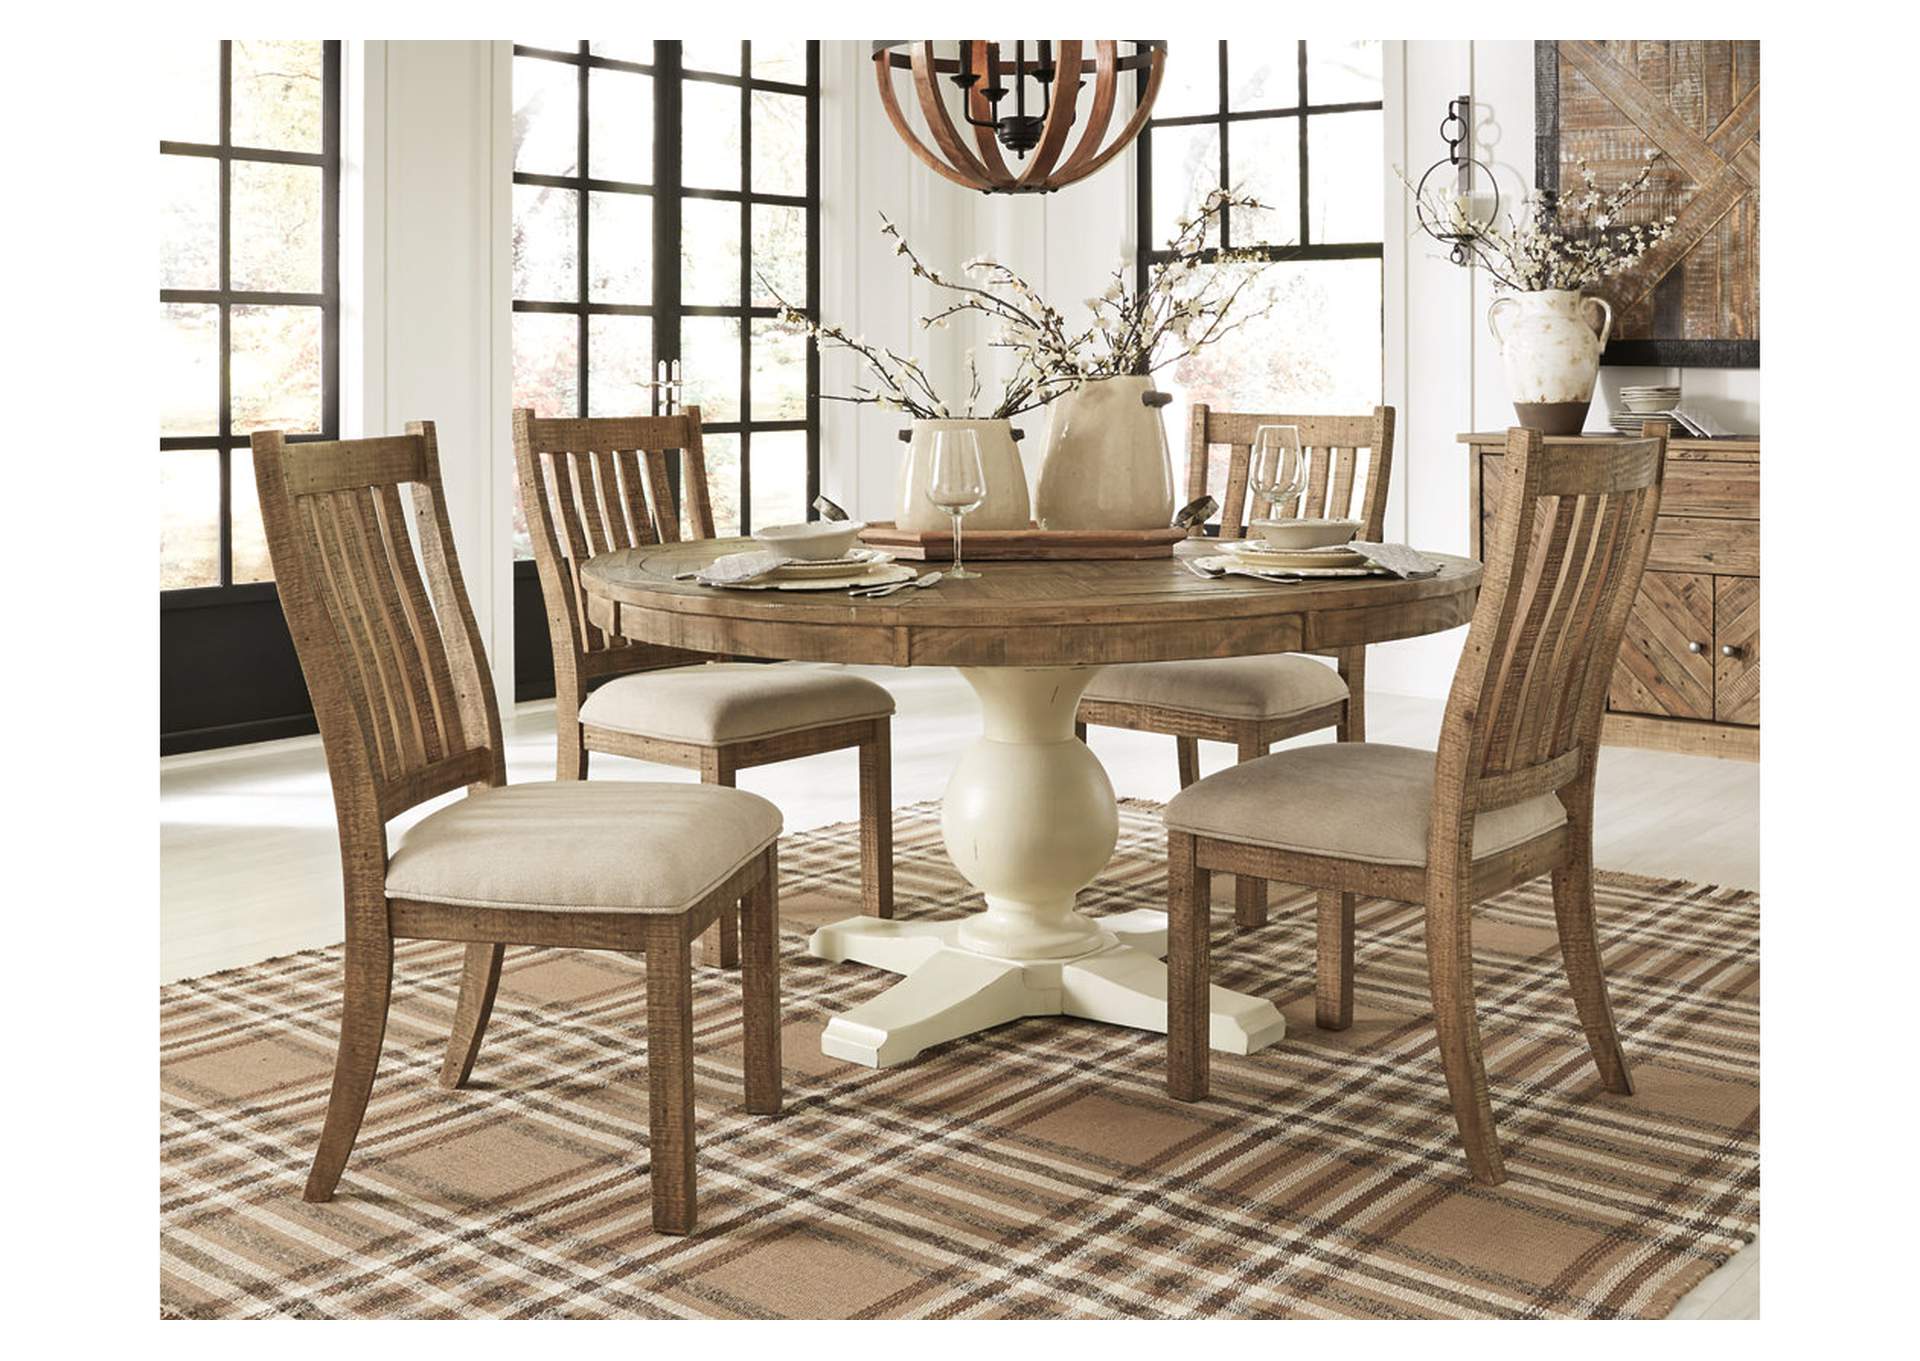 Grindleburg Dining Chair,Signature Design By Ashley